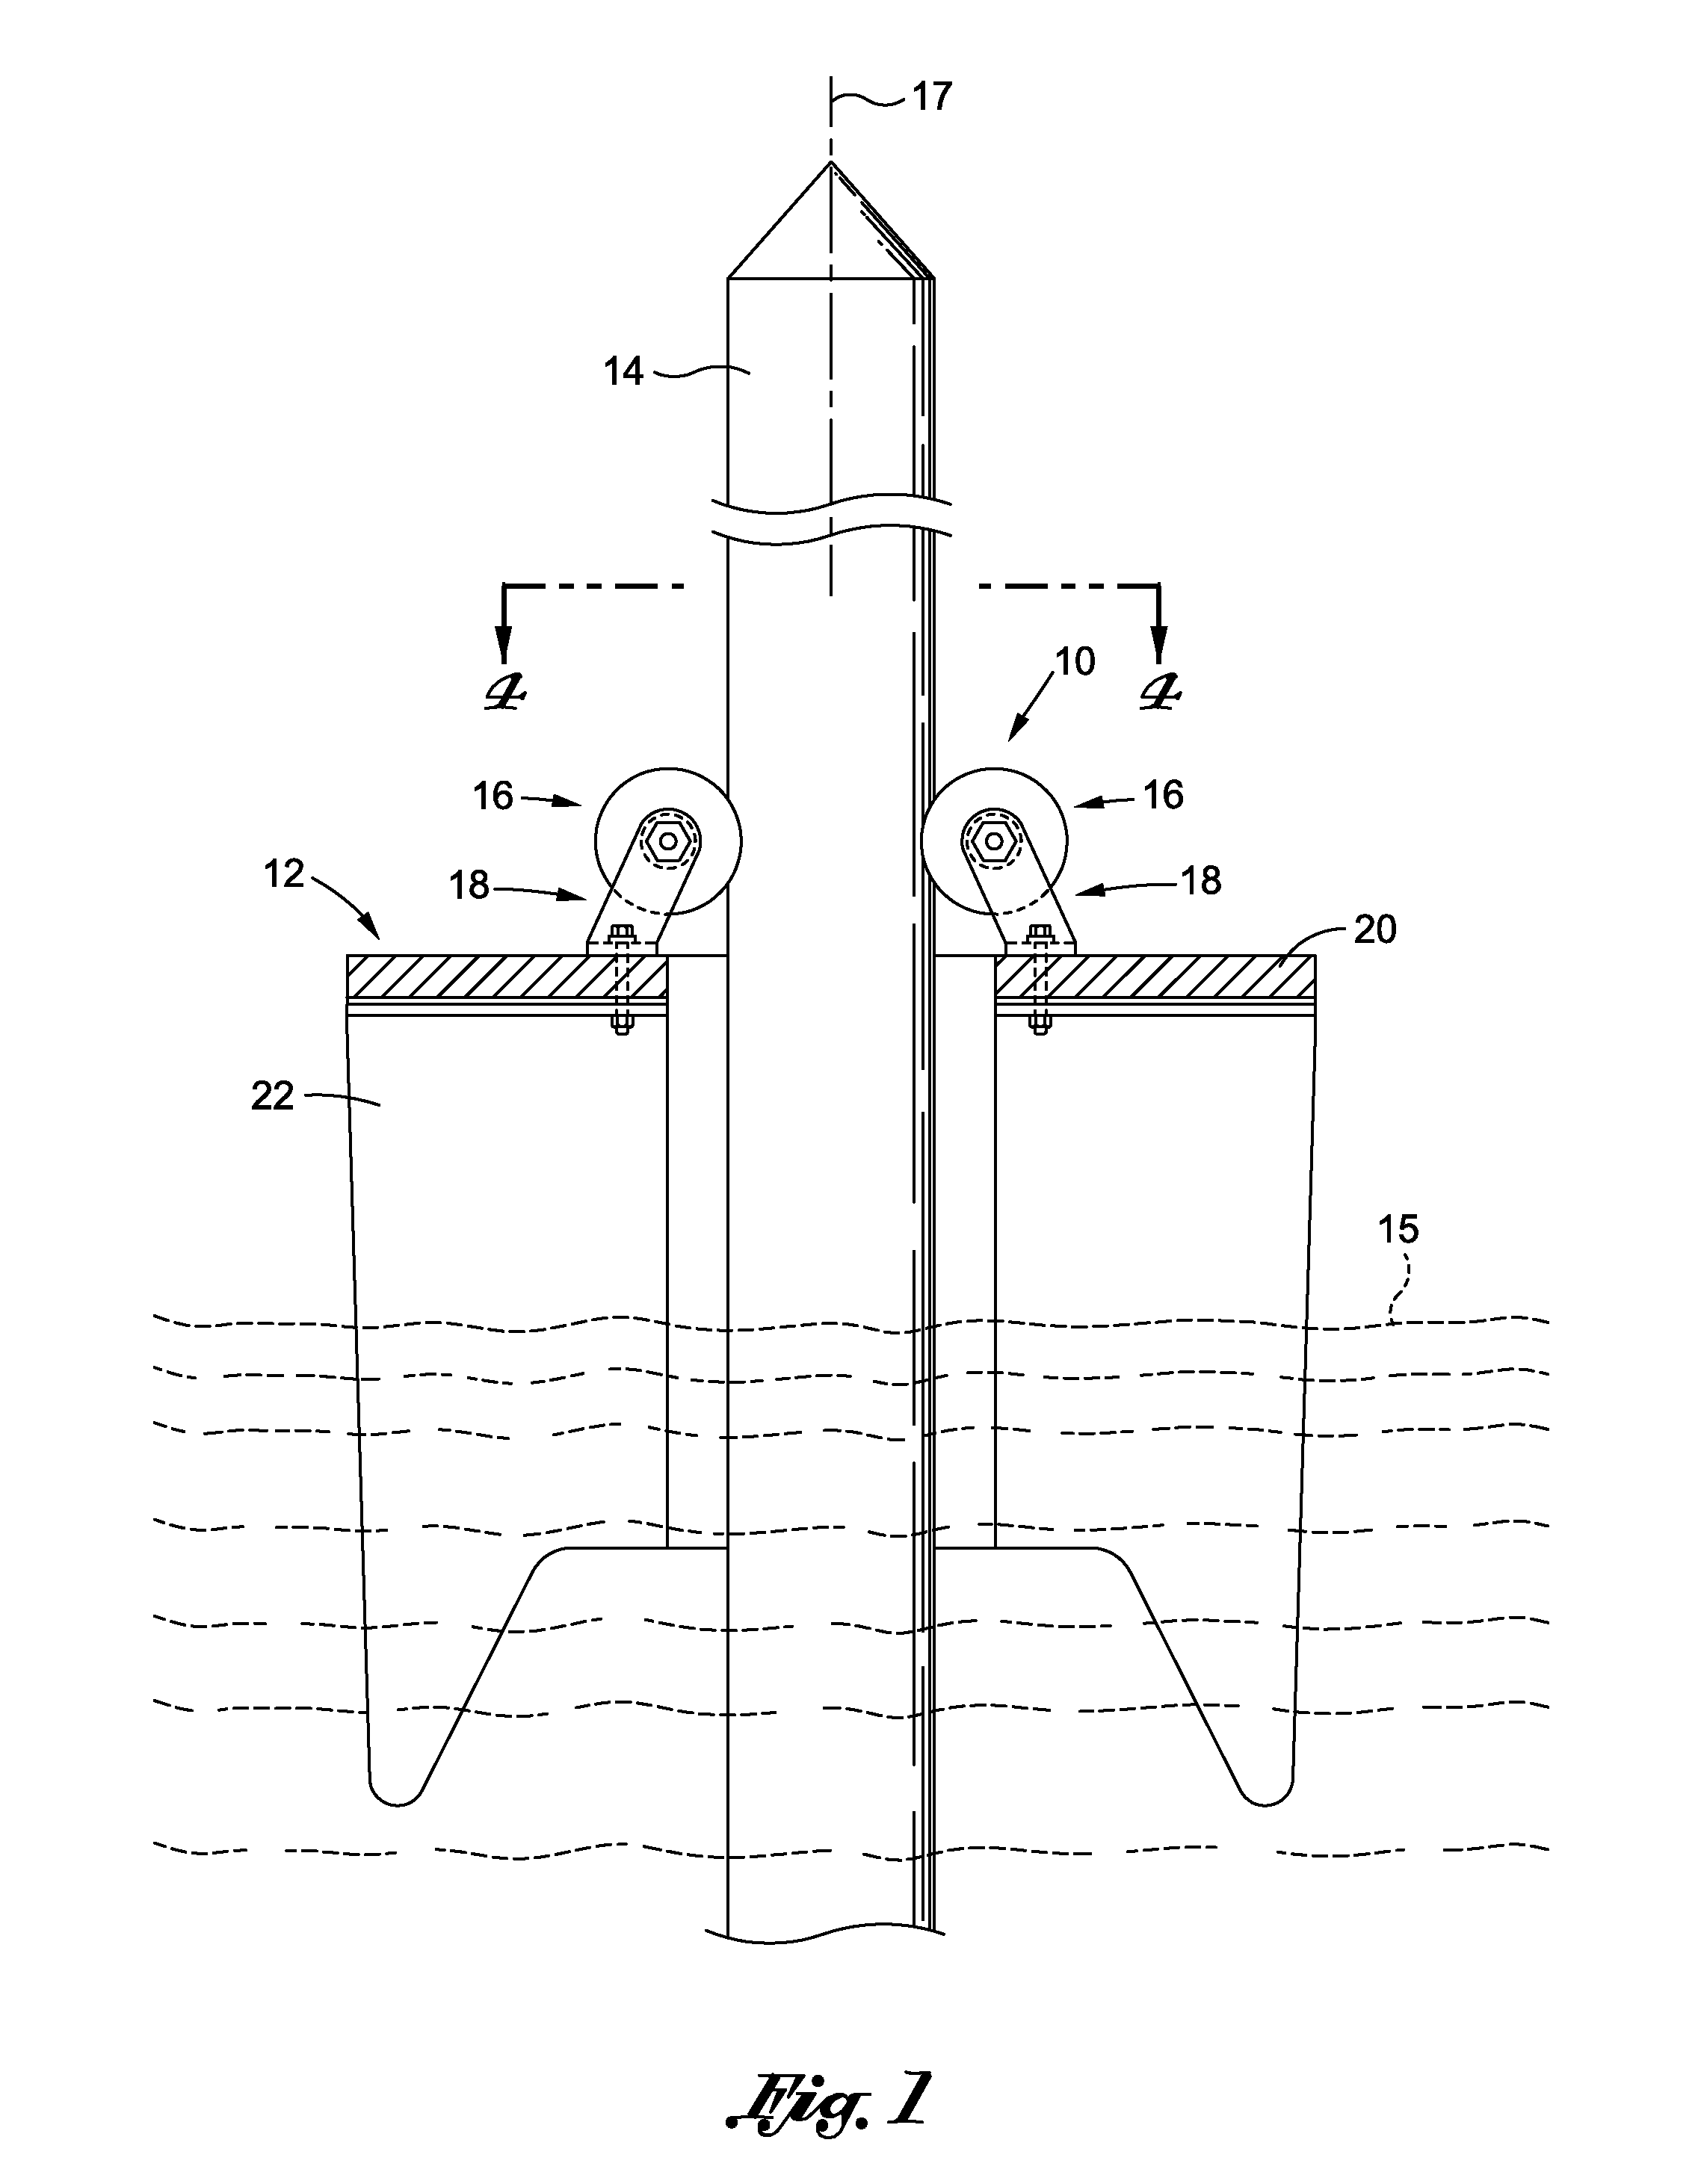 Compressible roller for use in stabilizing a floating dock